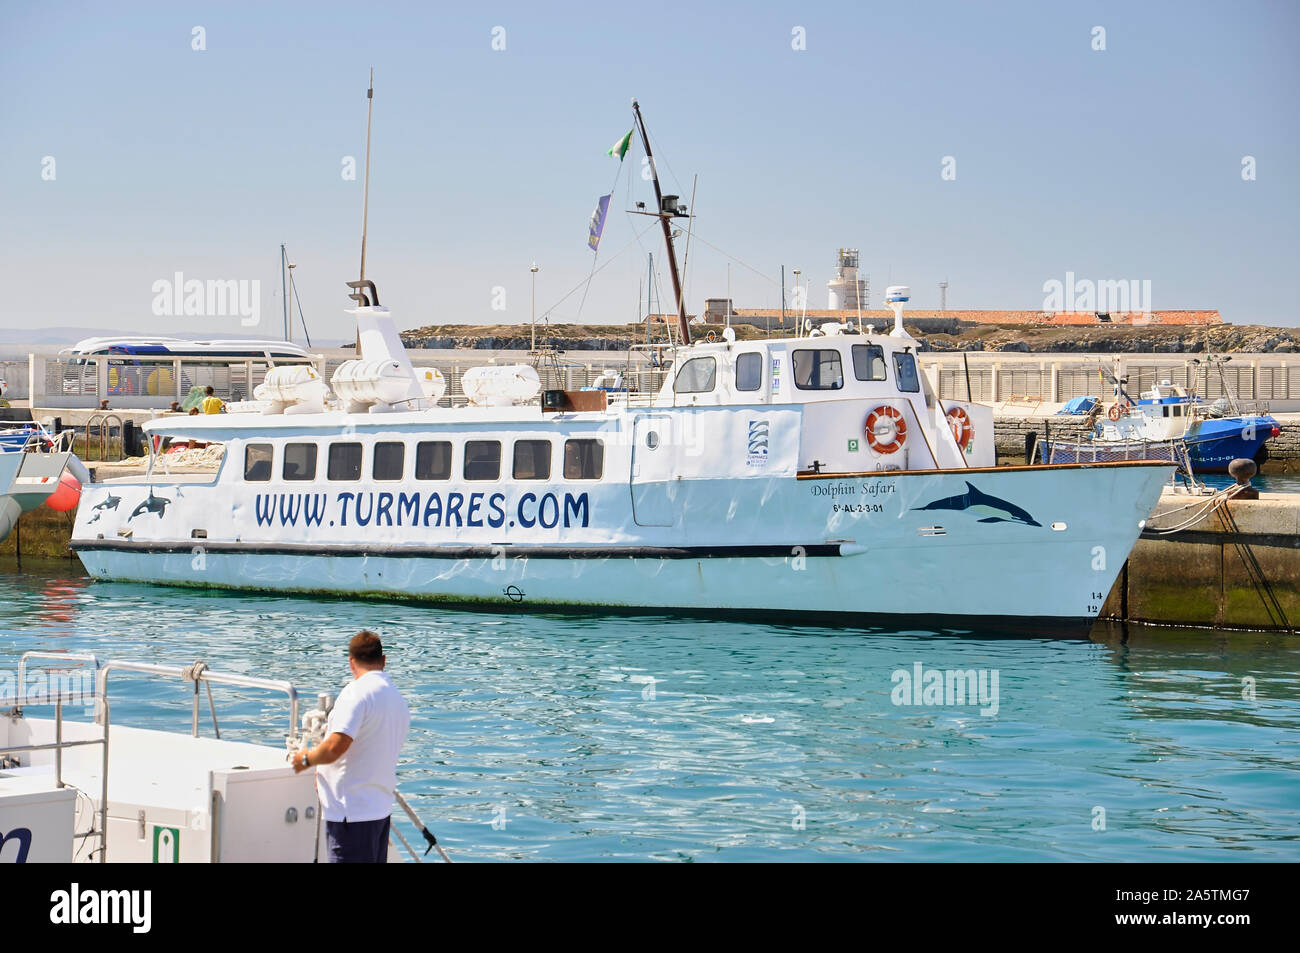 Whale watching boat called Dolphin Safari from Turmares whale-watching agency docked at Tarifa port (Tarifa, Cádiz, Andalusia, Spain) Stock Photo